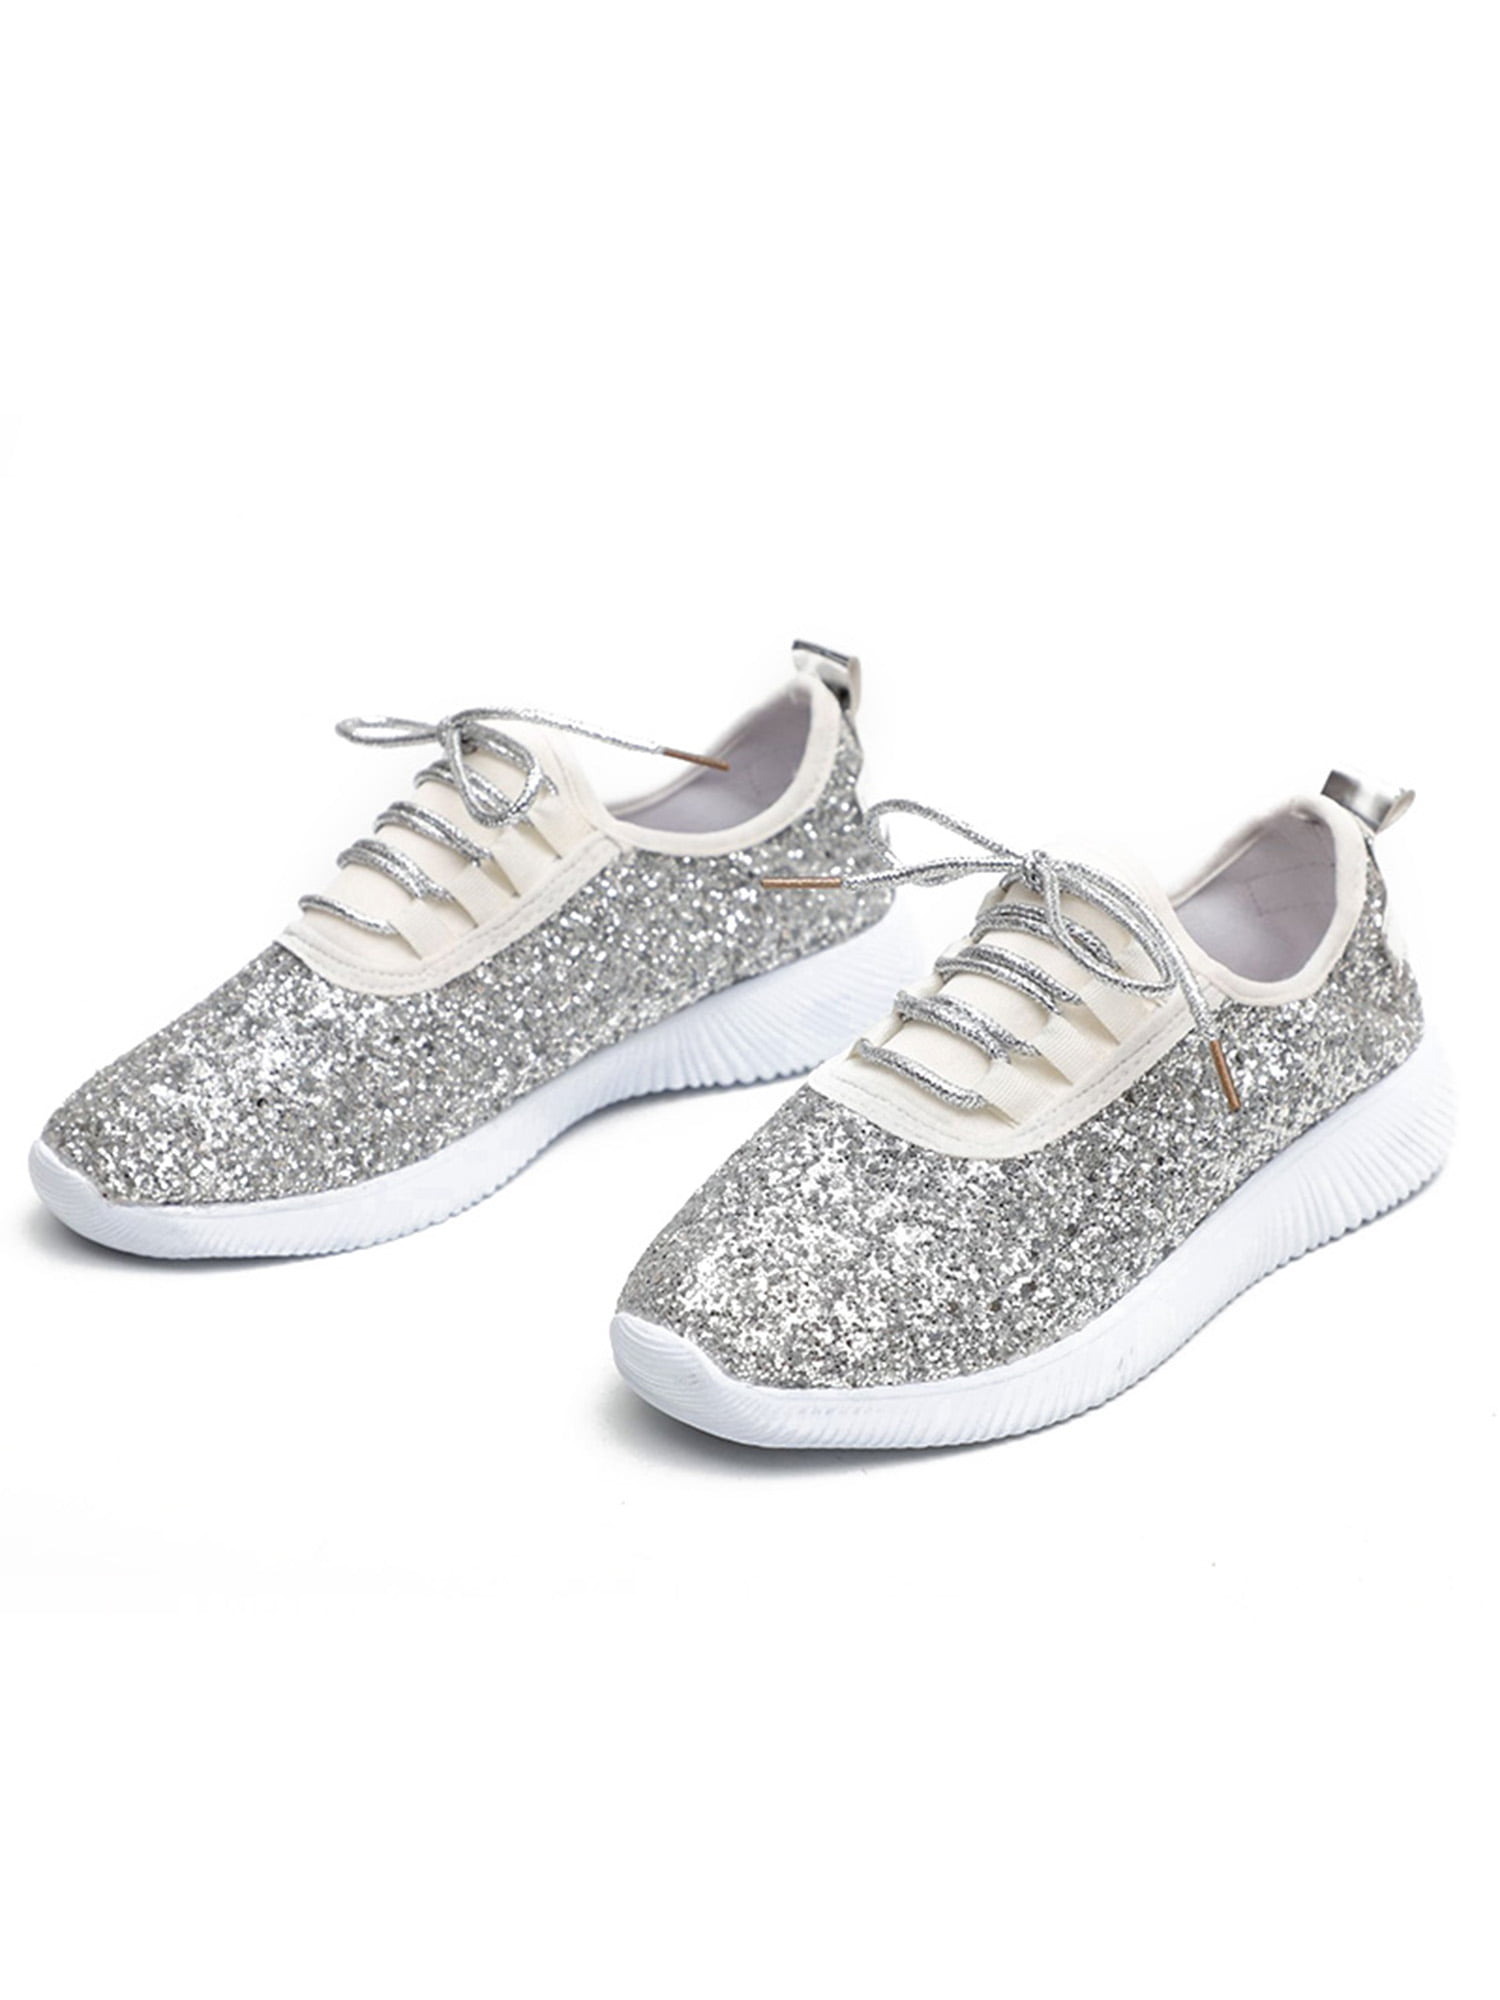 KIDS GIRLS GLITTER SILVER LACE UP LIGHTWEIGHT TRAINERS SPARKLY BLING SHOES SIZE 